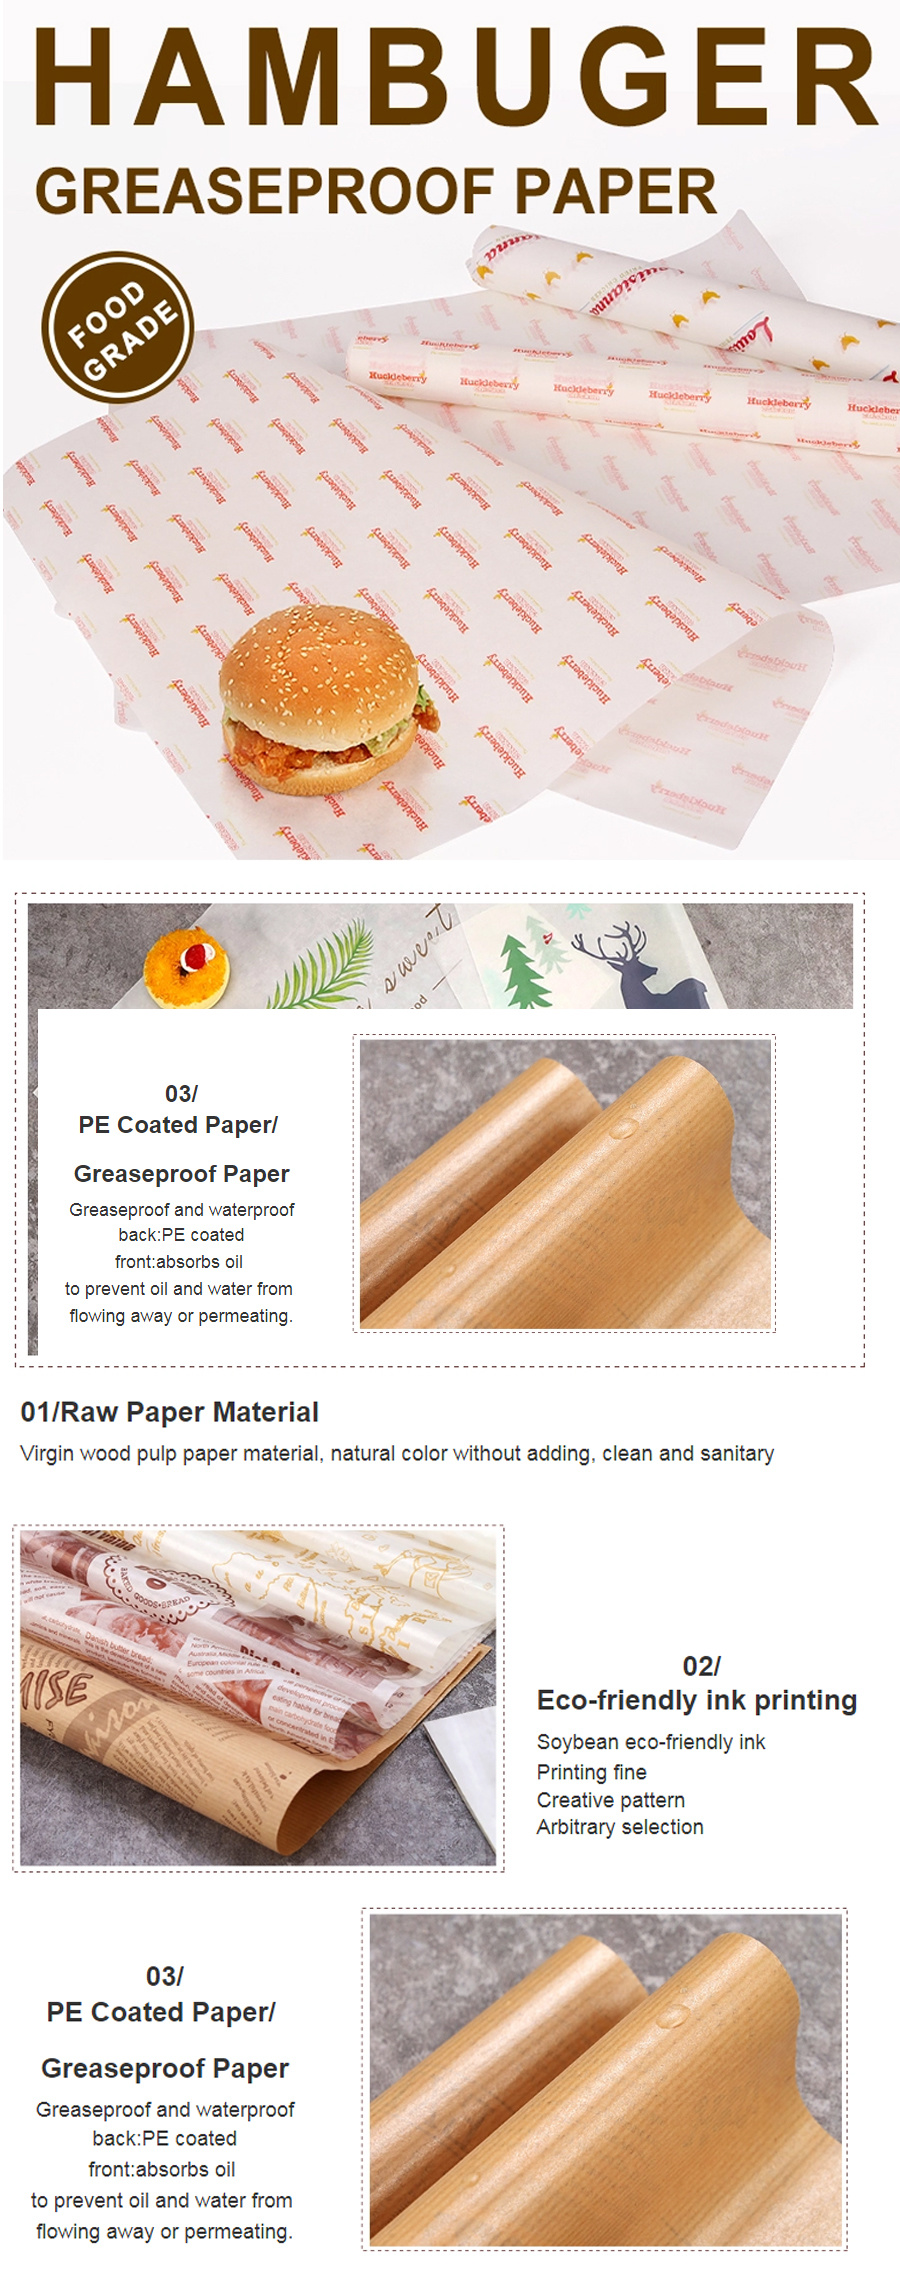 Custom Printing Hamburger Packaging Tissue Paper Wrapping Grease Proof Hamburger Paper for Fast Food Restaurant